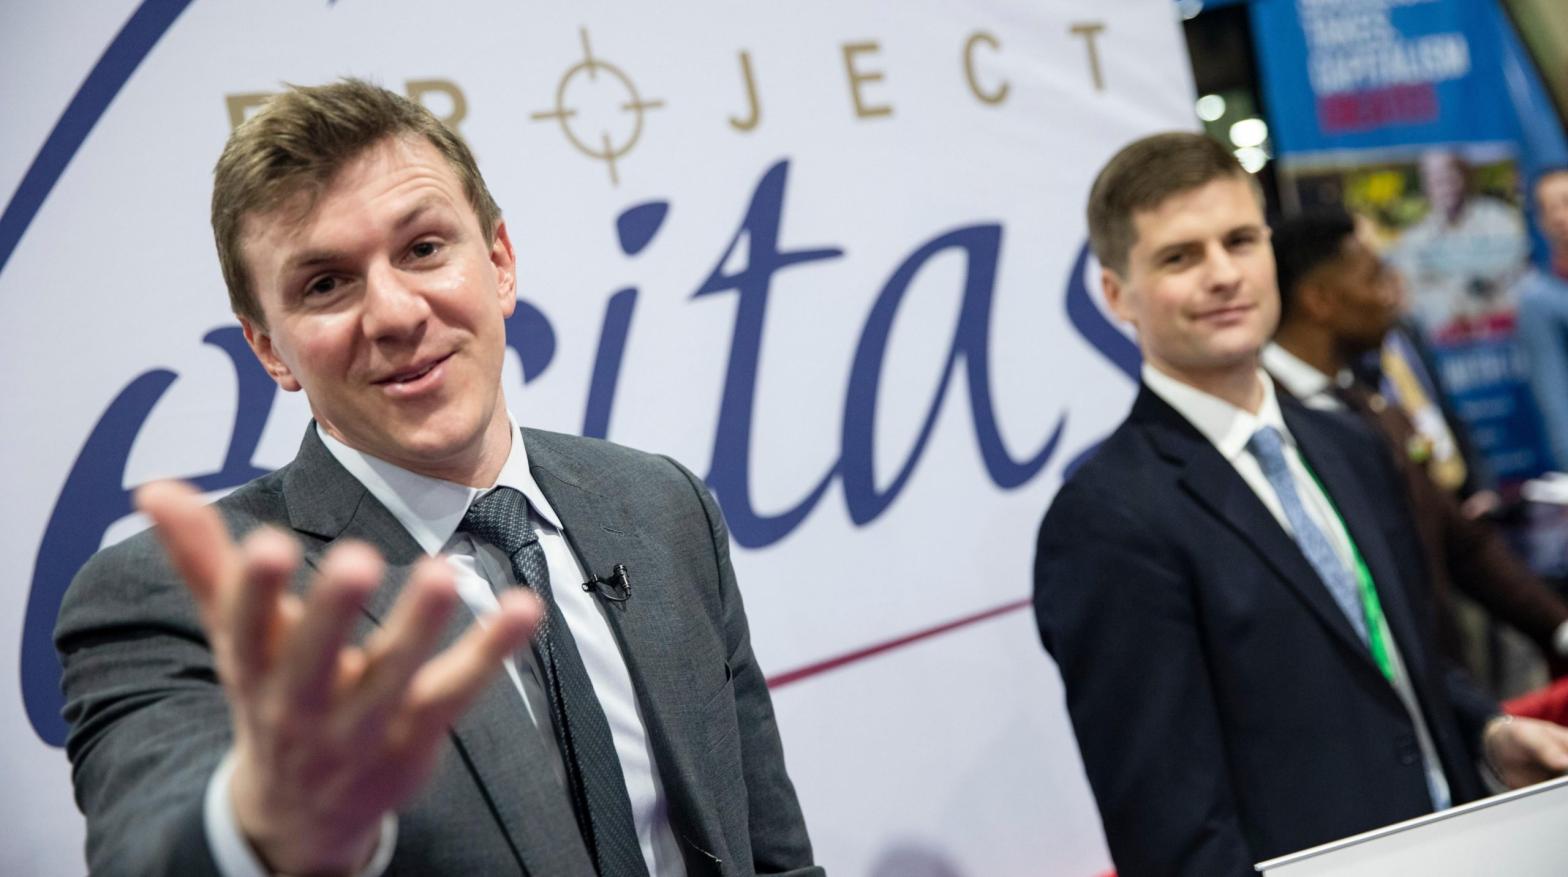 James O'Keefe, the founder of Project Veritas, at the Conservative Political Action Conference 2020 (CPAC) in National Harbour, Maryland on February 28, 2020.  (Photo: Samuel Corum, Getty Images)